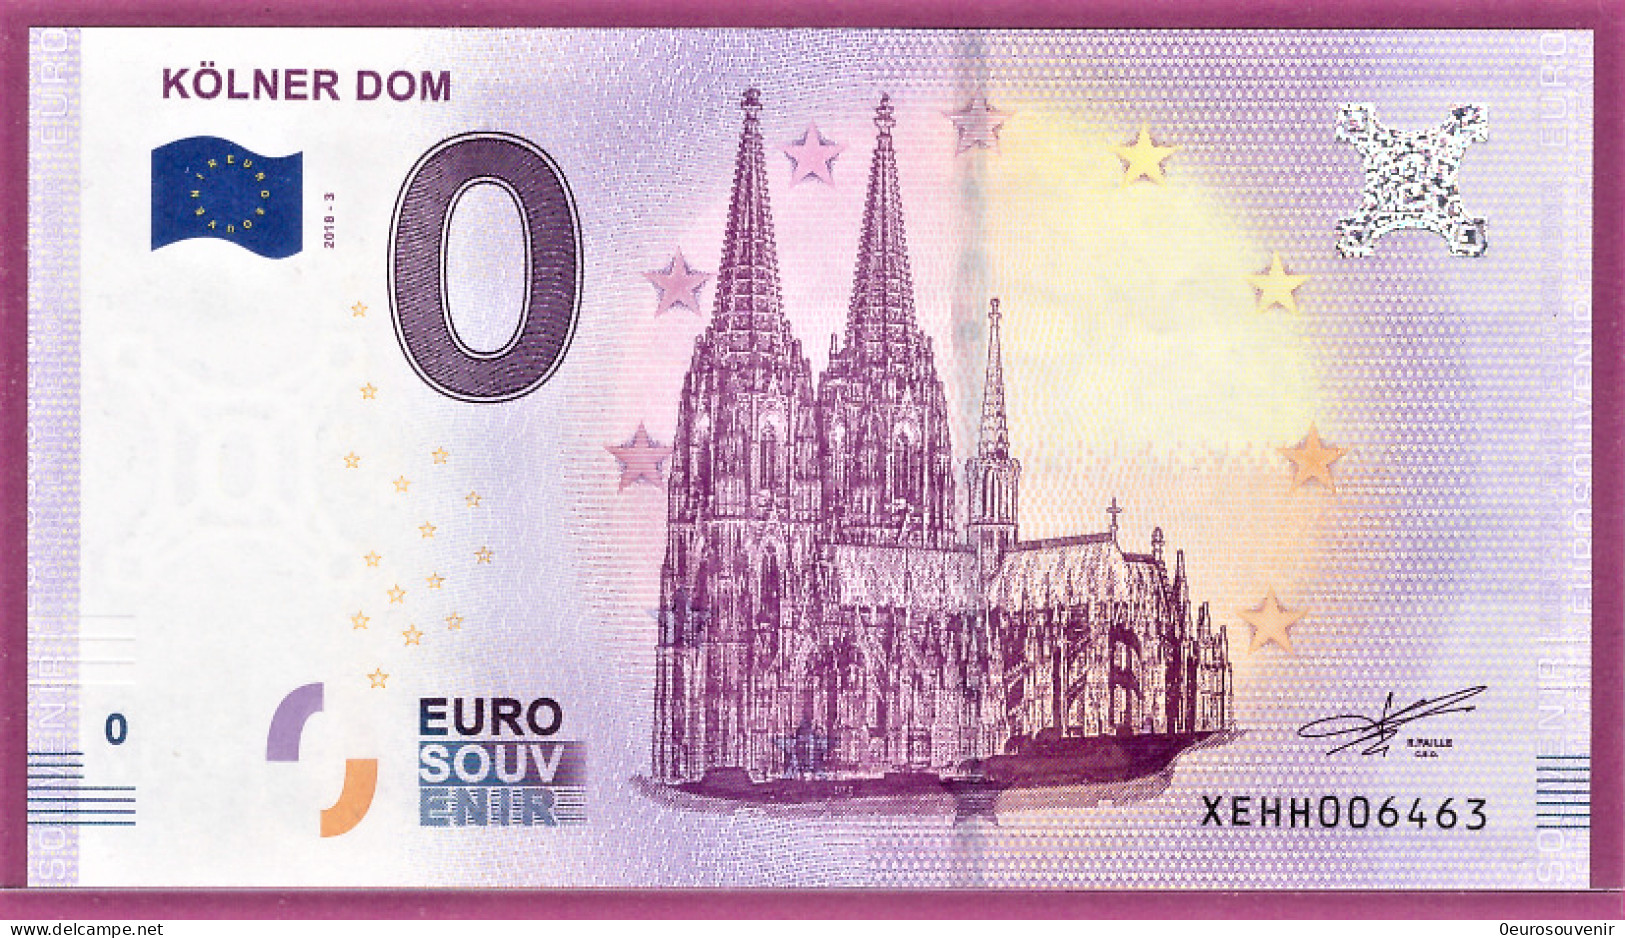 0-Euro XEHH 2018-3 KÖLNER DOM - Private Proofs / Unofficial